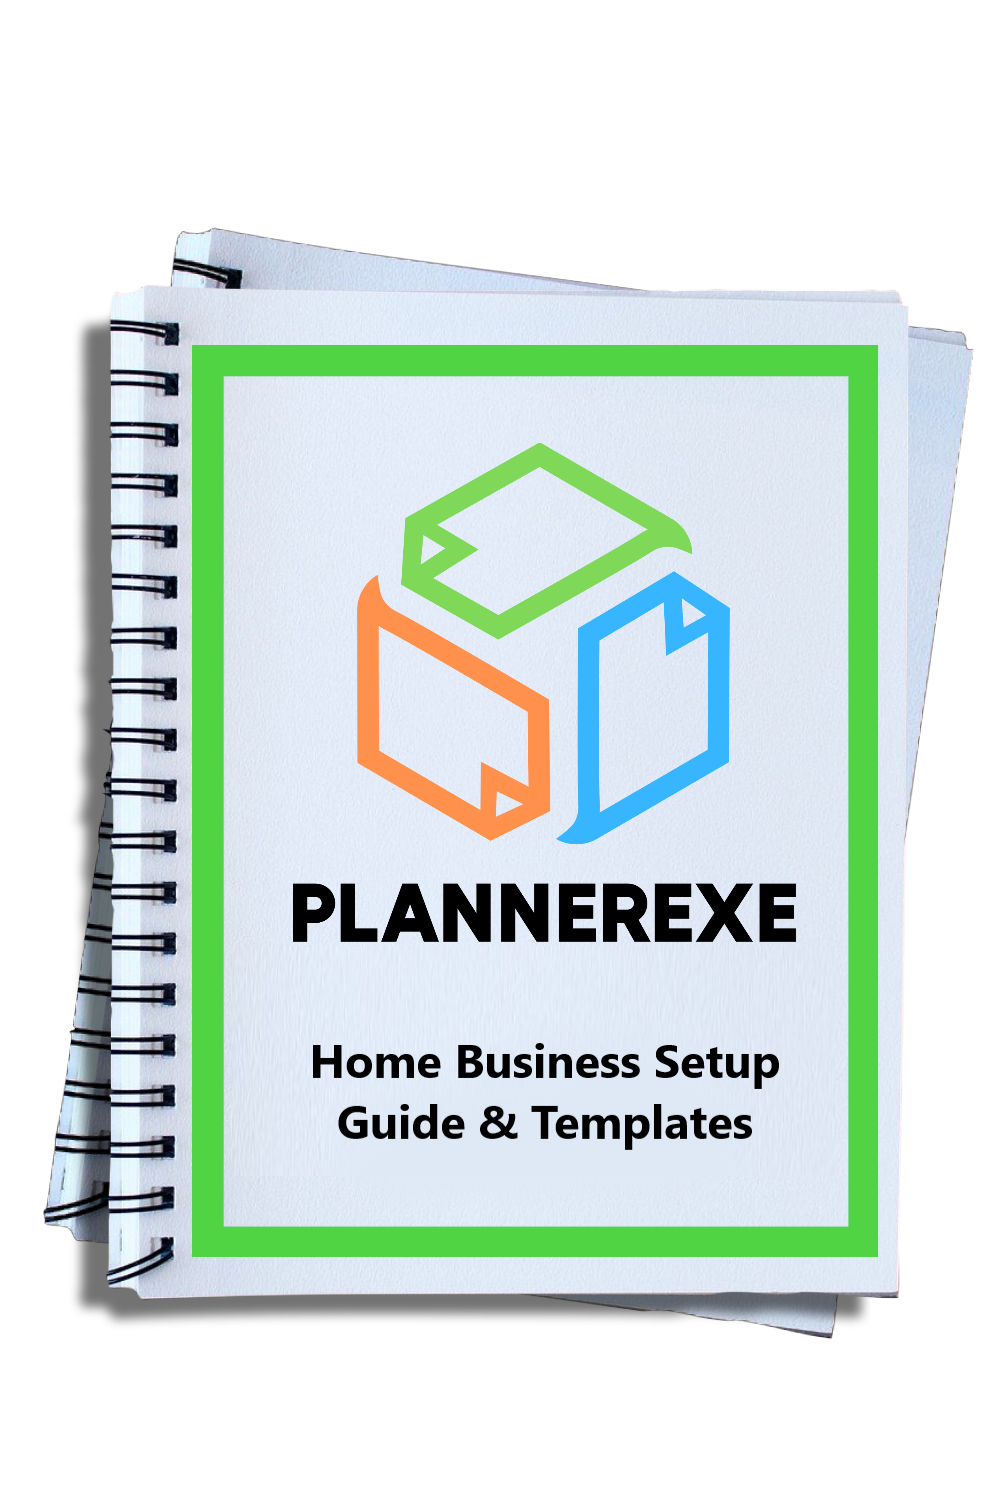 Home Business Setup Guide and Templates